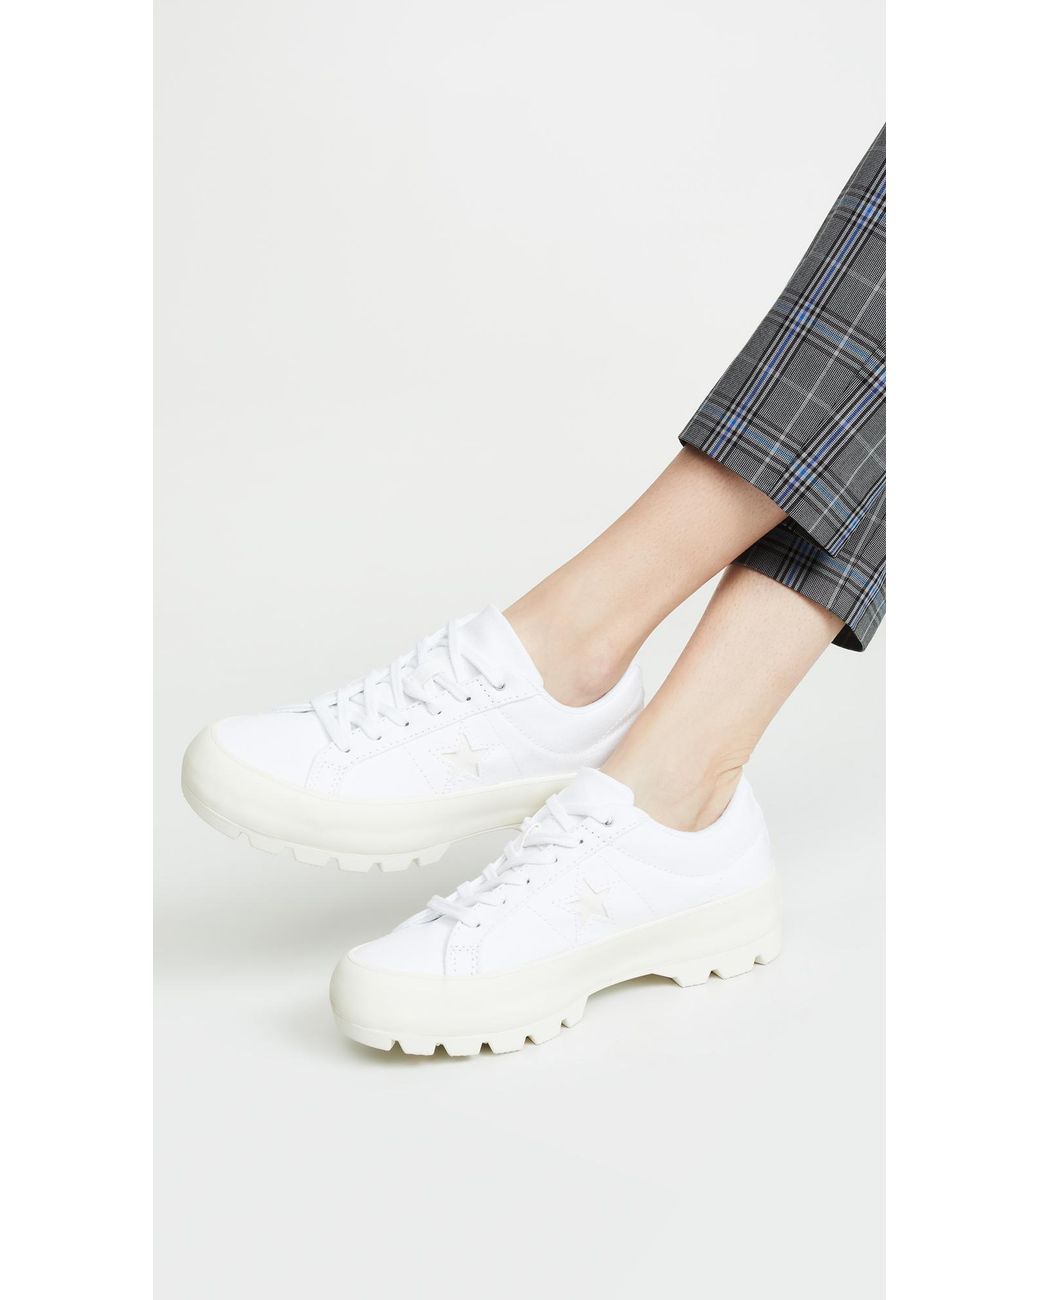 Converse Canvas One Star Lugged Ox Sneakers in White | Lyst